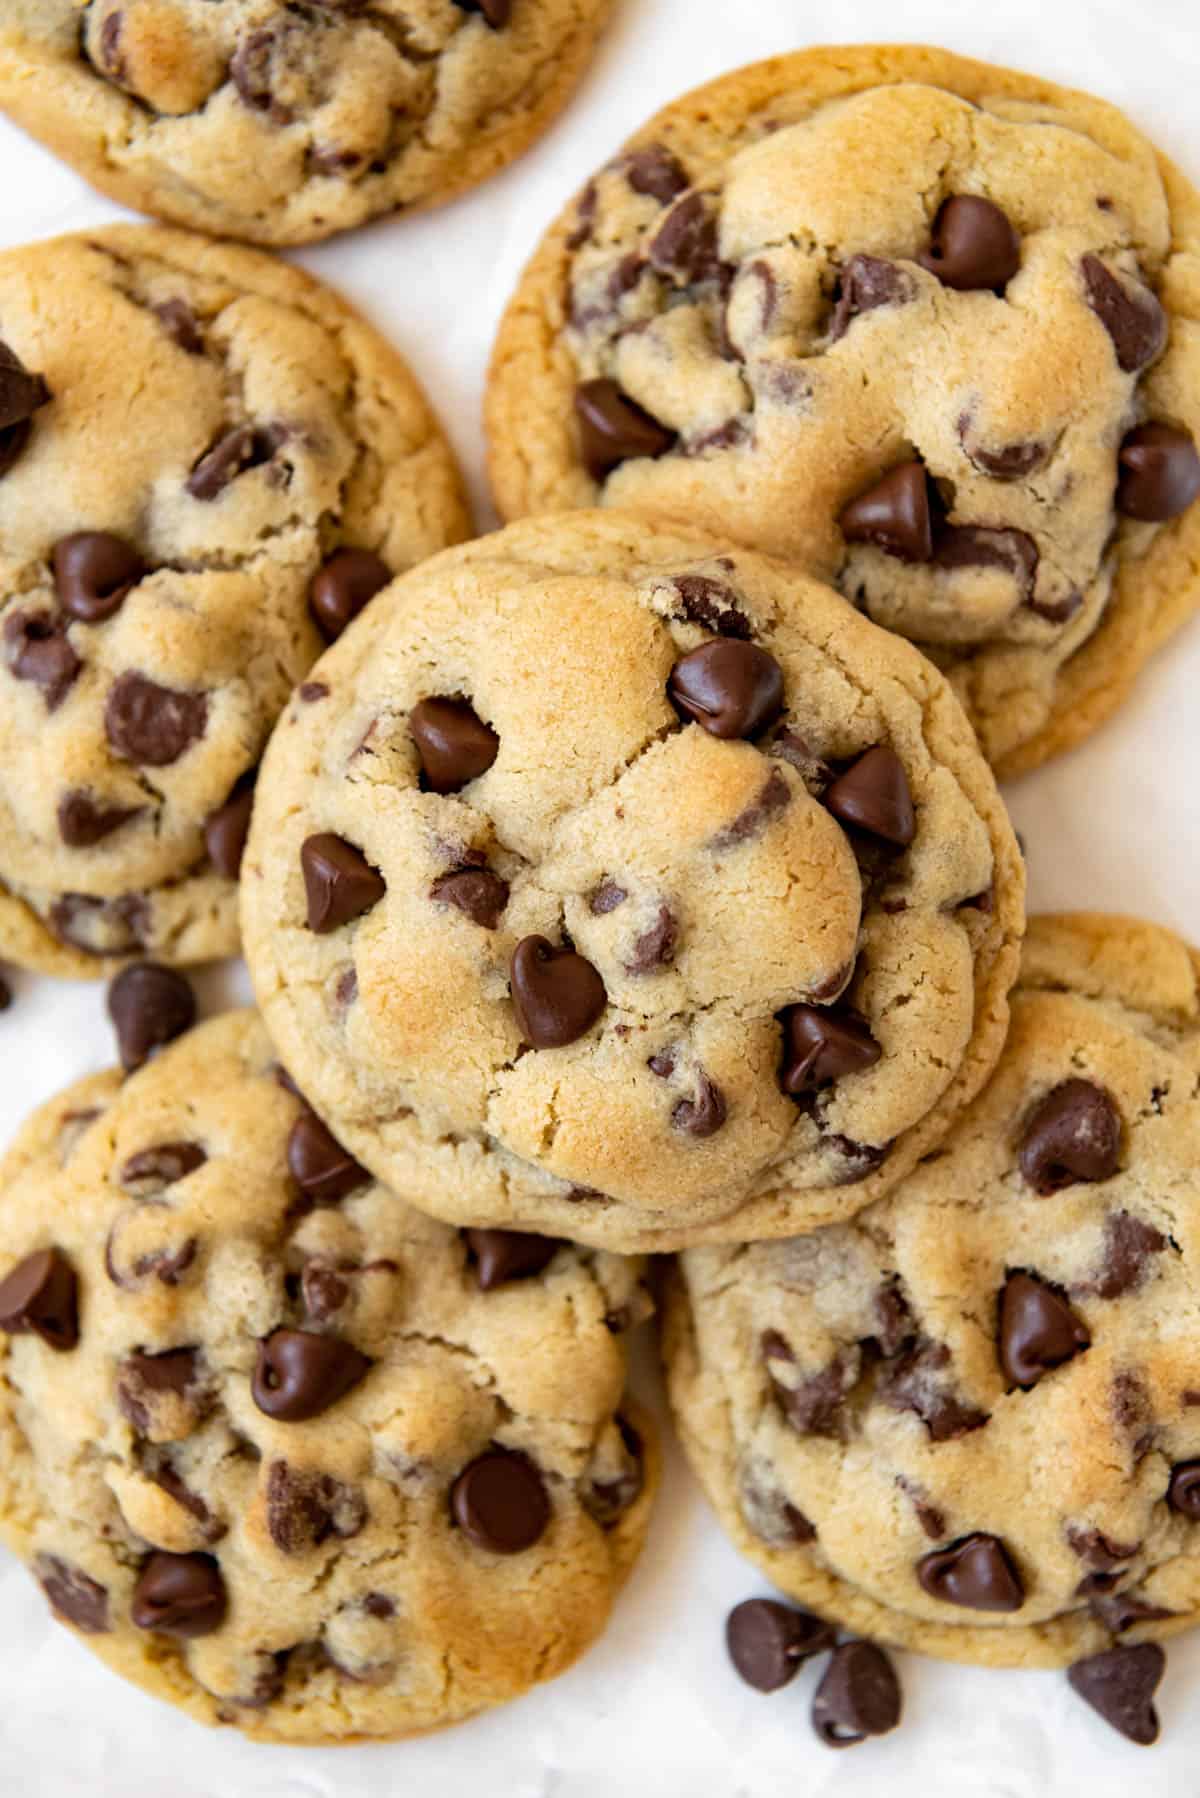 A close image of homemade chocolate chip cookies with semisweet chocolate chips.